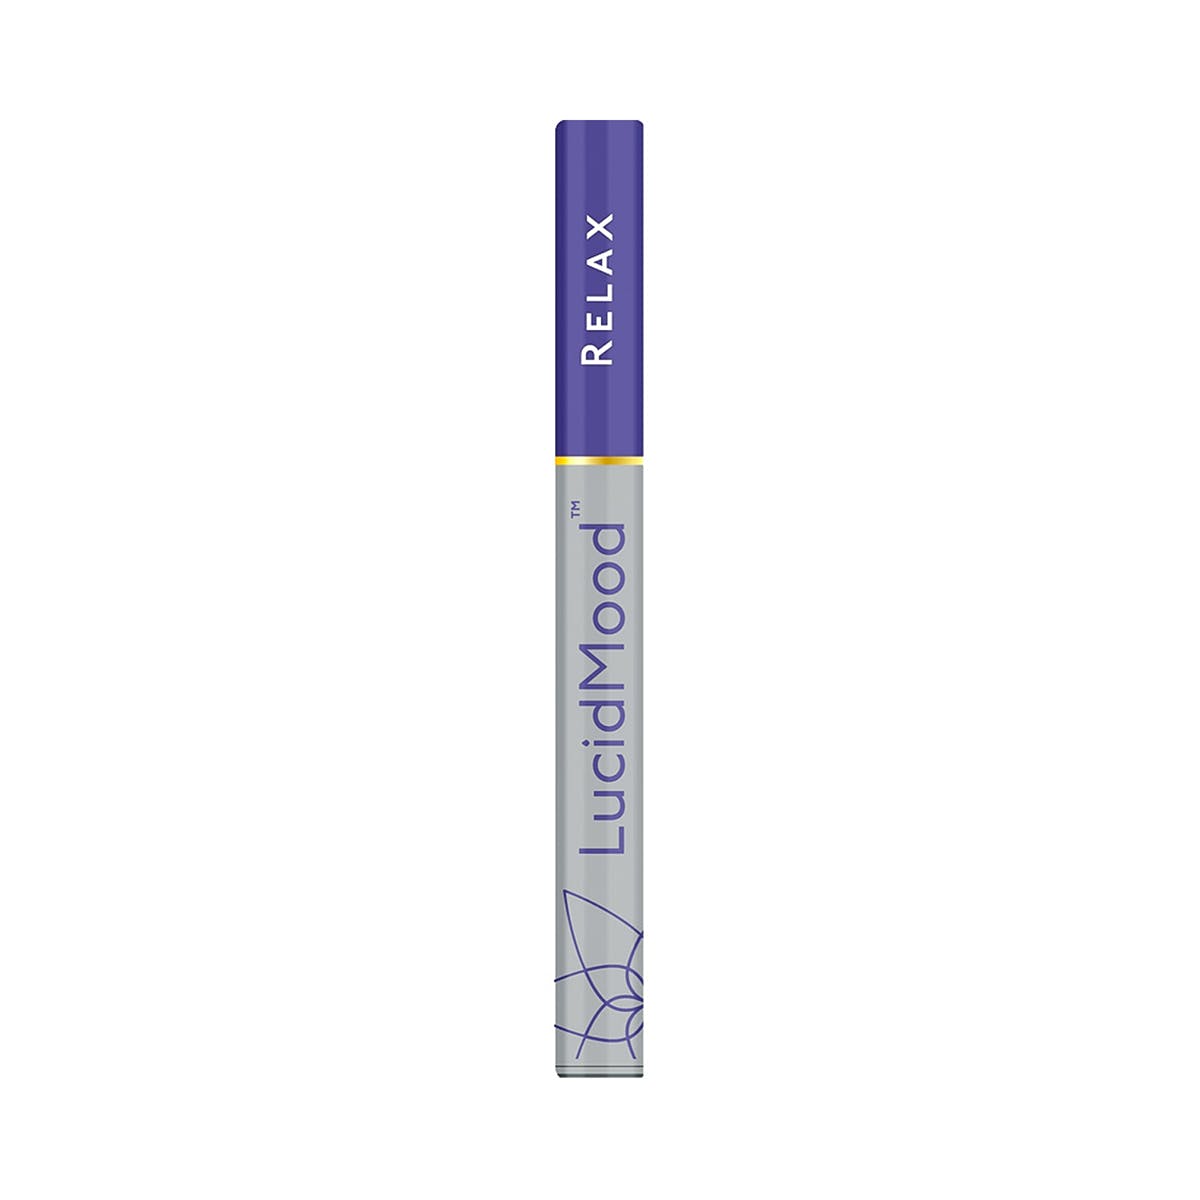 concentrate-lucidmood-relax-11-thccbd-200mg